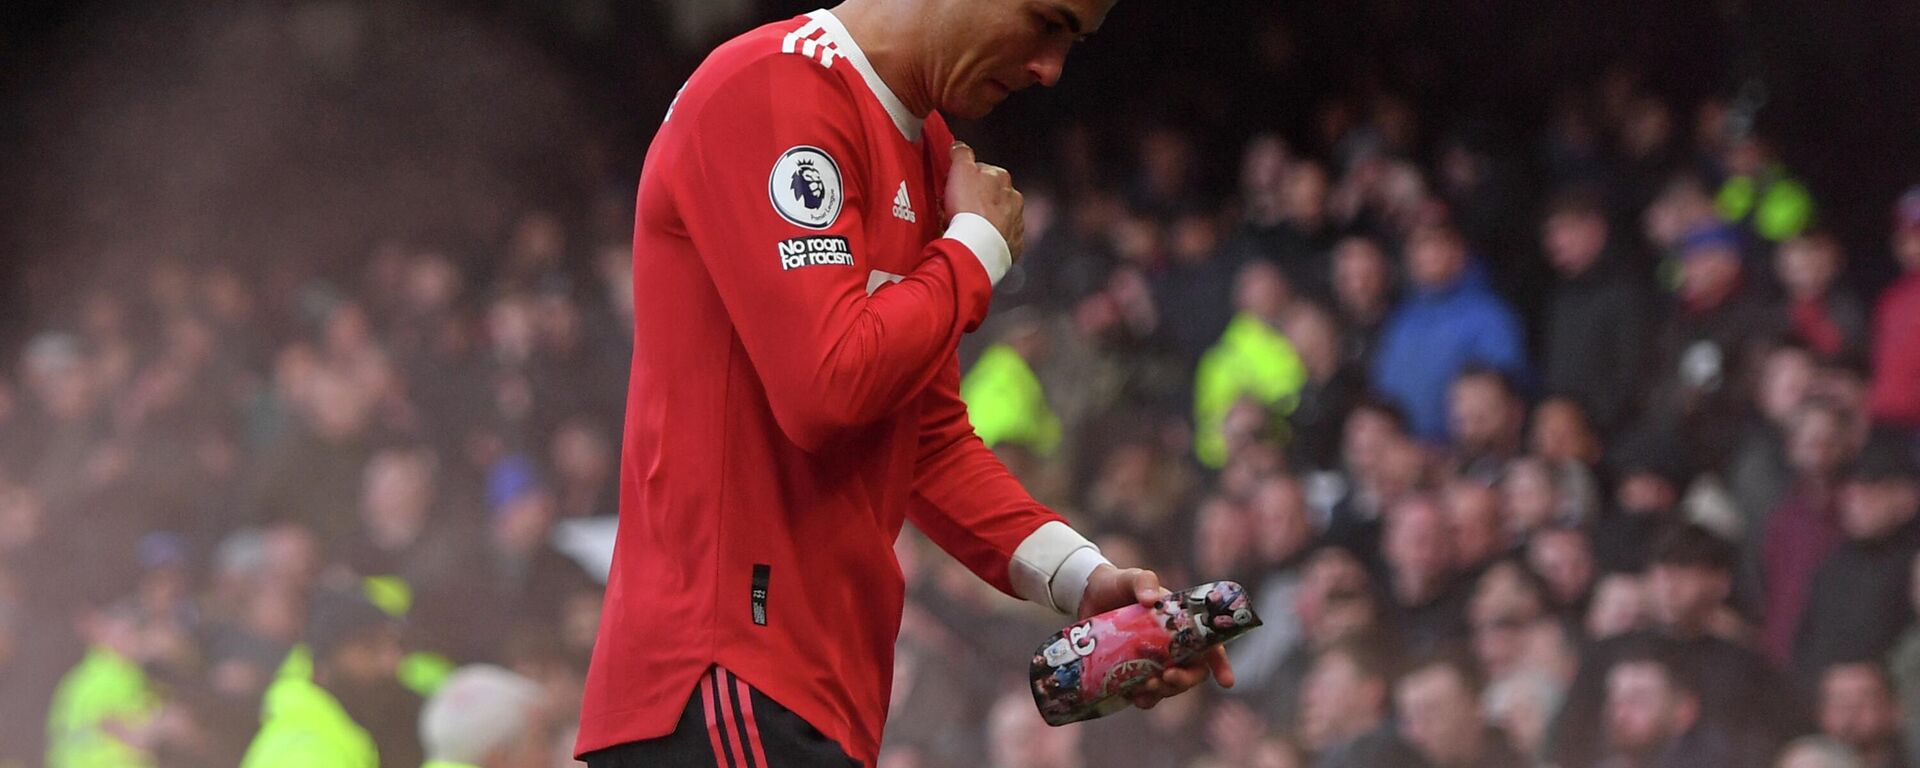 Manchester United's Portuguese striker Cristiano Ronaldo reacts to their defeat as he leaves after the English Premier League football match between Everton and Manchester United at Goodison Park in Liverpool, north west England on April 9, 2022. - Sputnik International, 1920, 10.04.2022